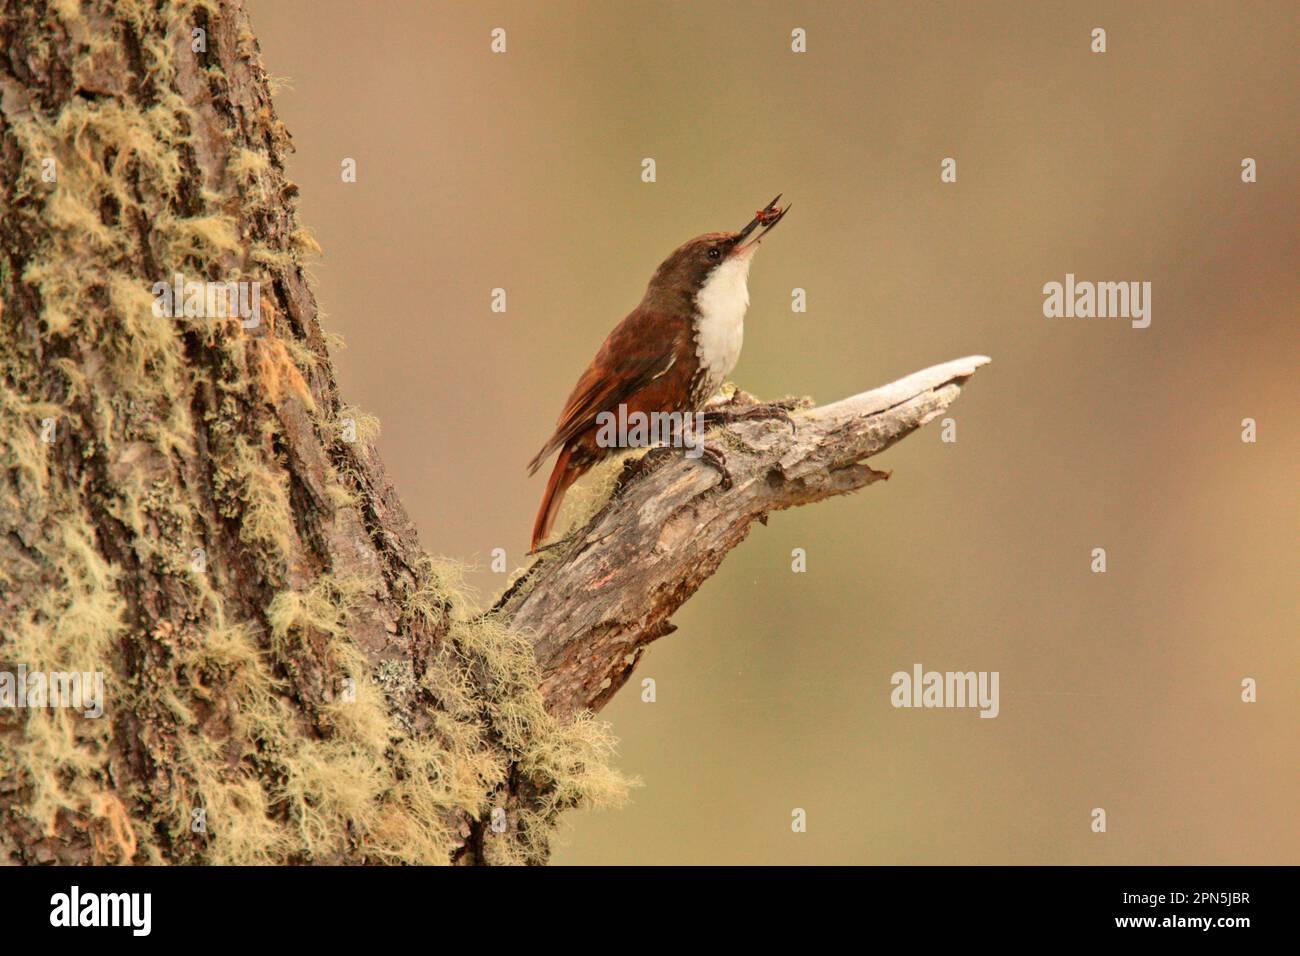 White-throated Treerunner (Pygarrhichas albogularis) adult, with insect in beak, perched on tree trunk, Tierra del Fuego N. P. Tierra del Fuego Stock Photo